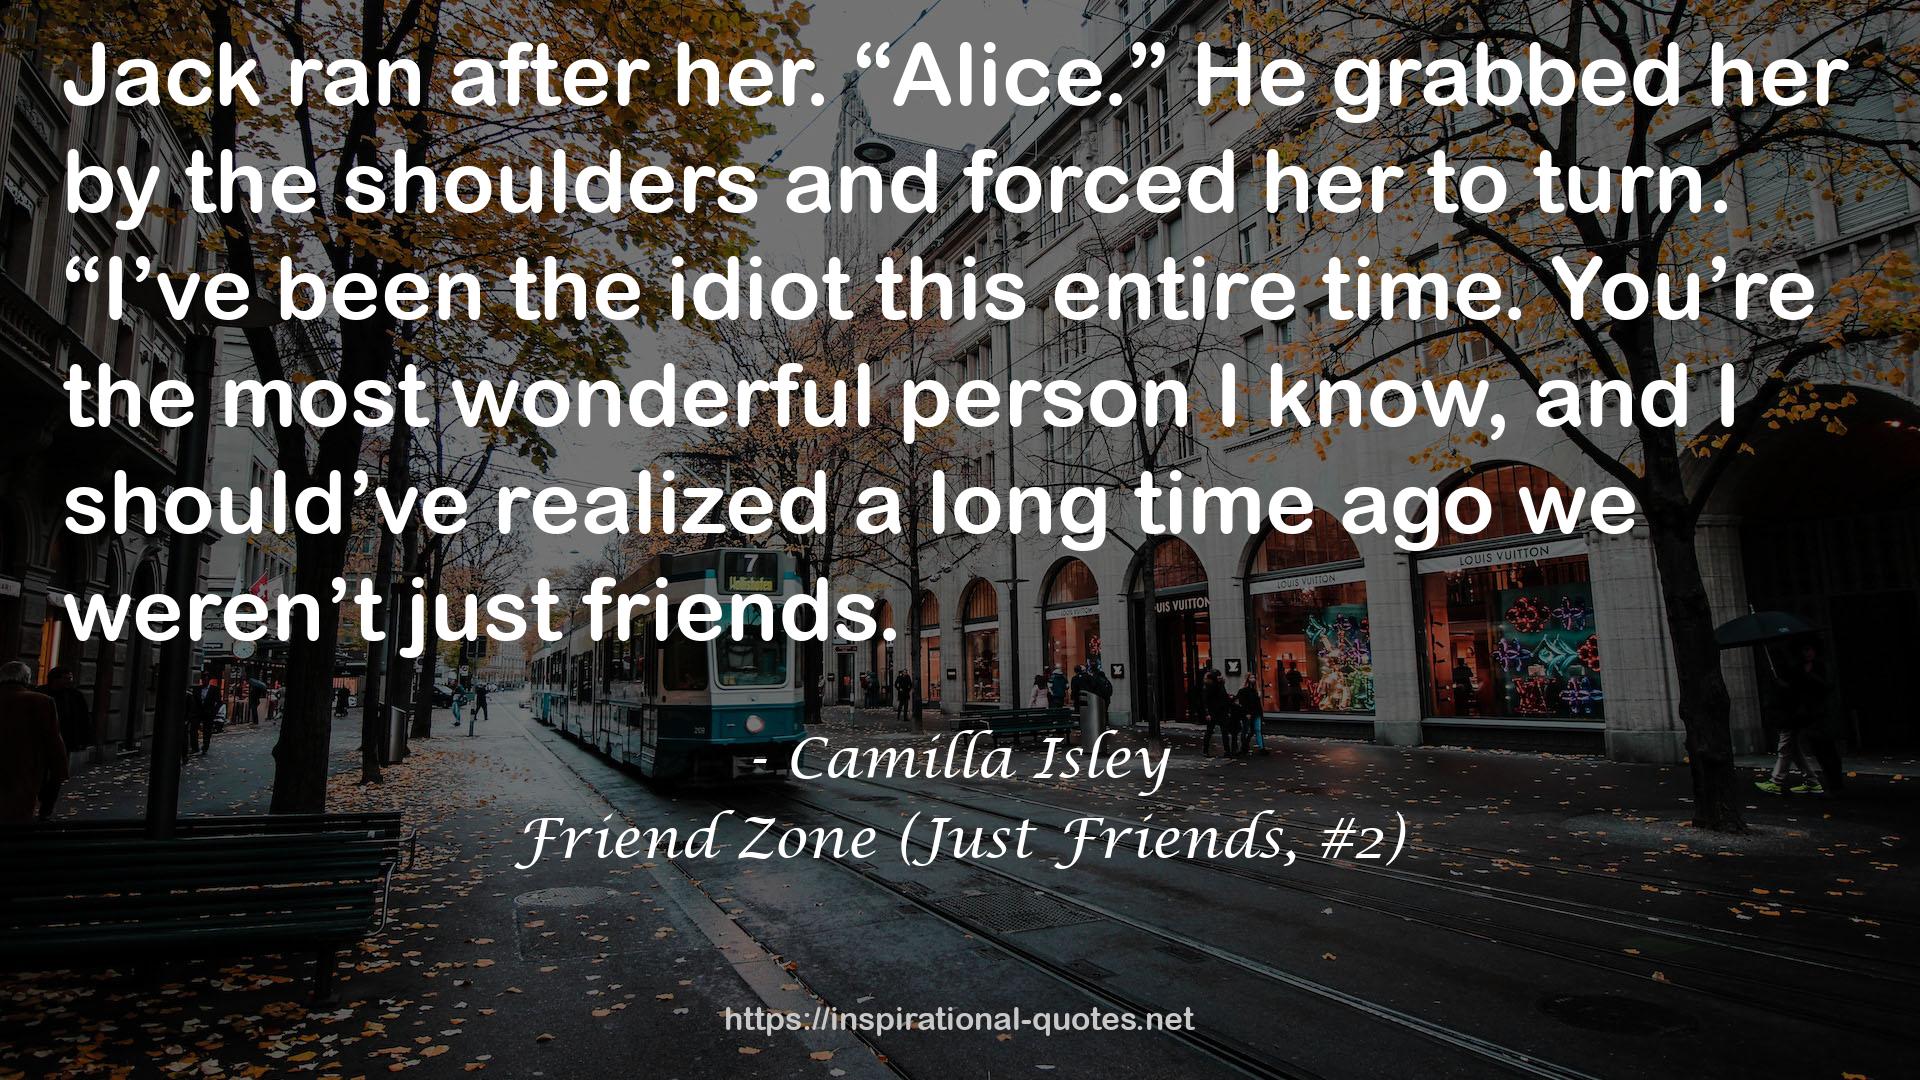 Friend Zone (Just Friends, #2) QUOTES